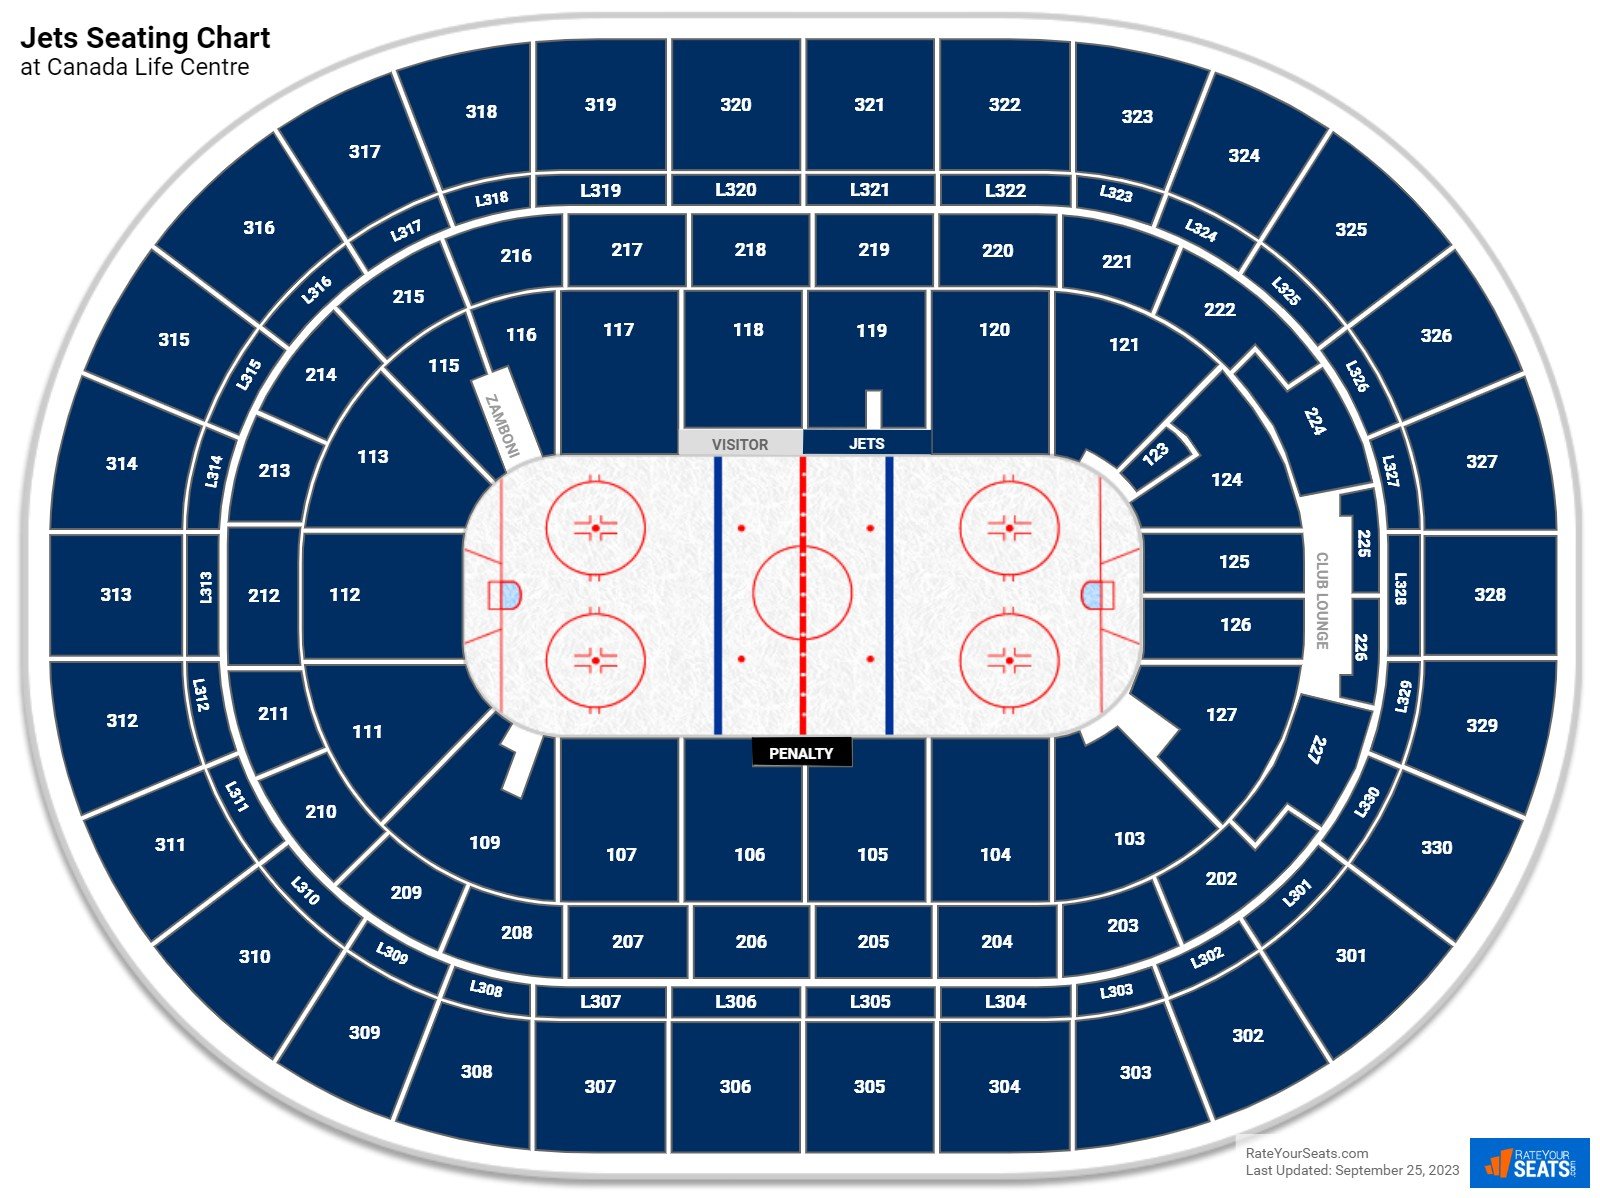 Winnipeg Jets Seating Chart at Canada Life Centre